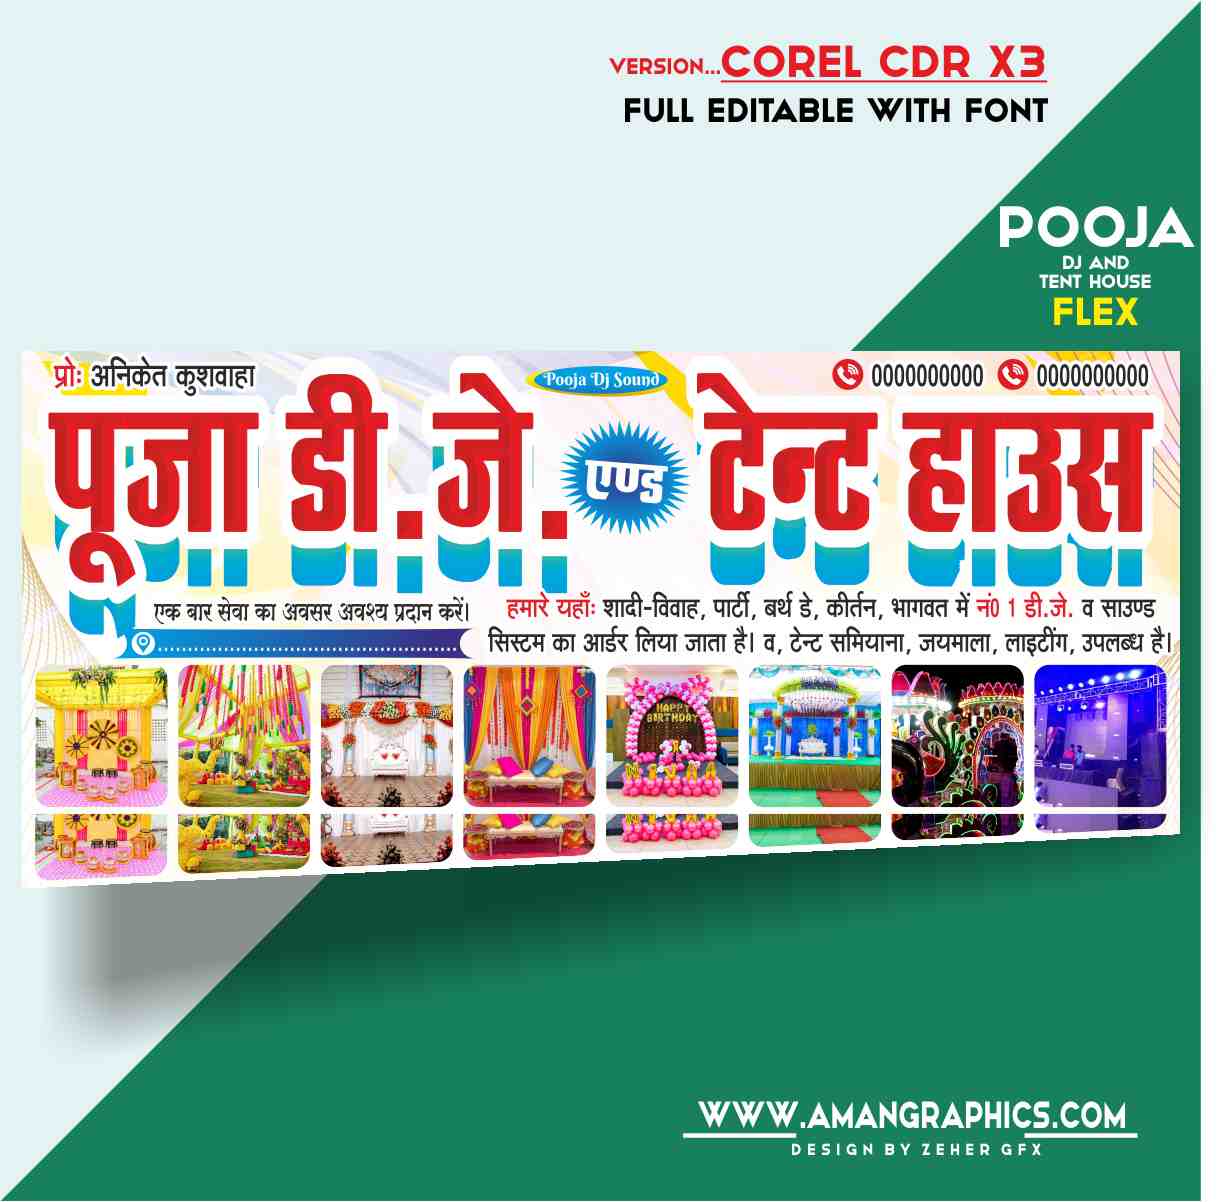 Pooja Dj And Tent House Banner Design Cdr File